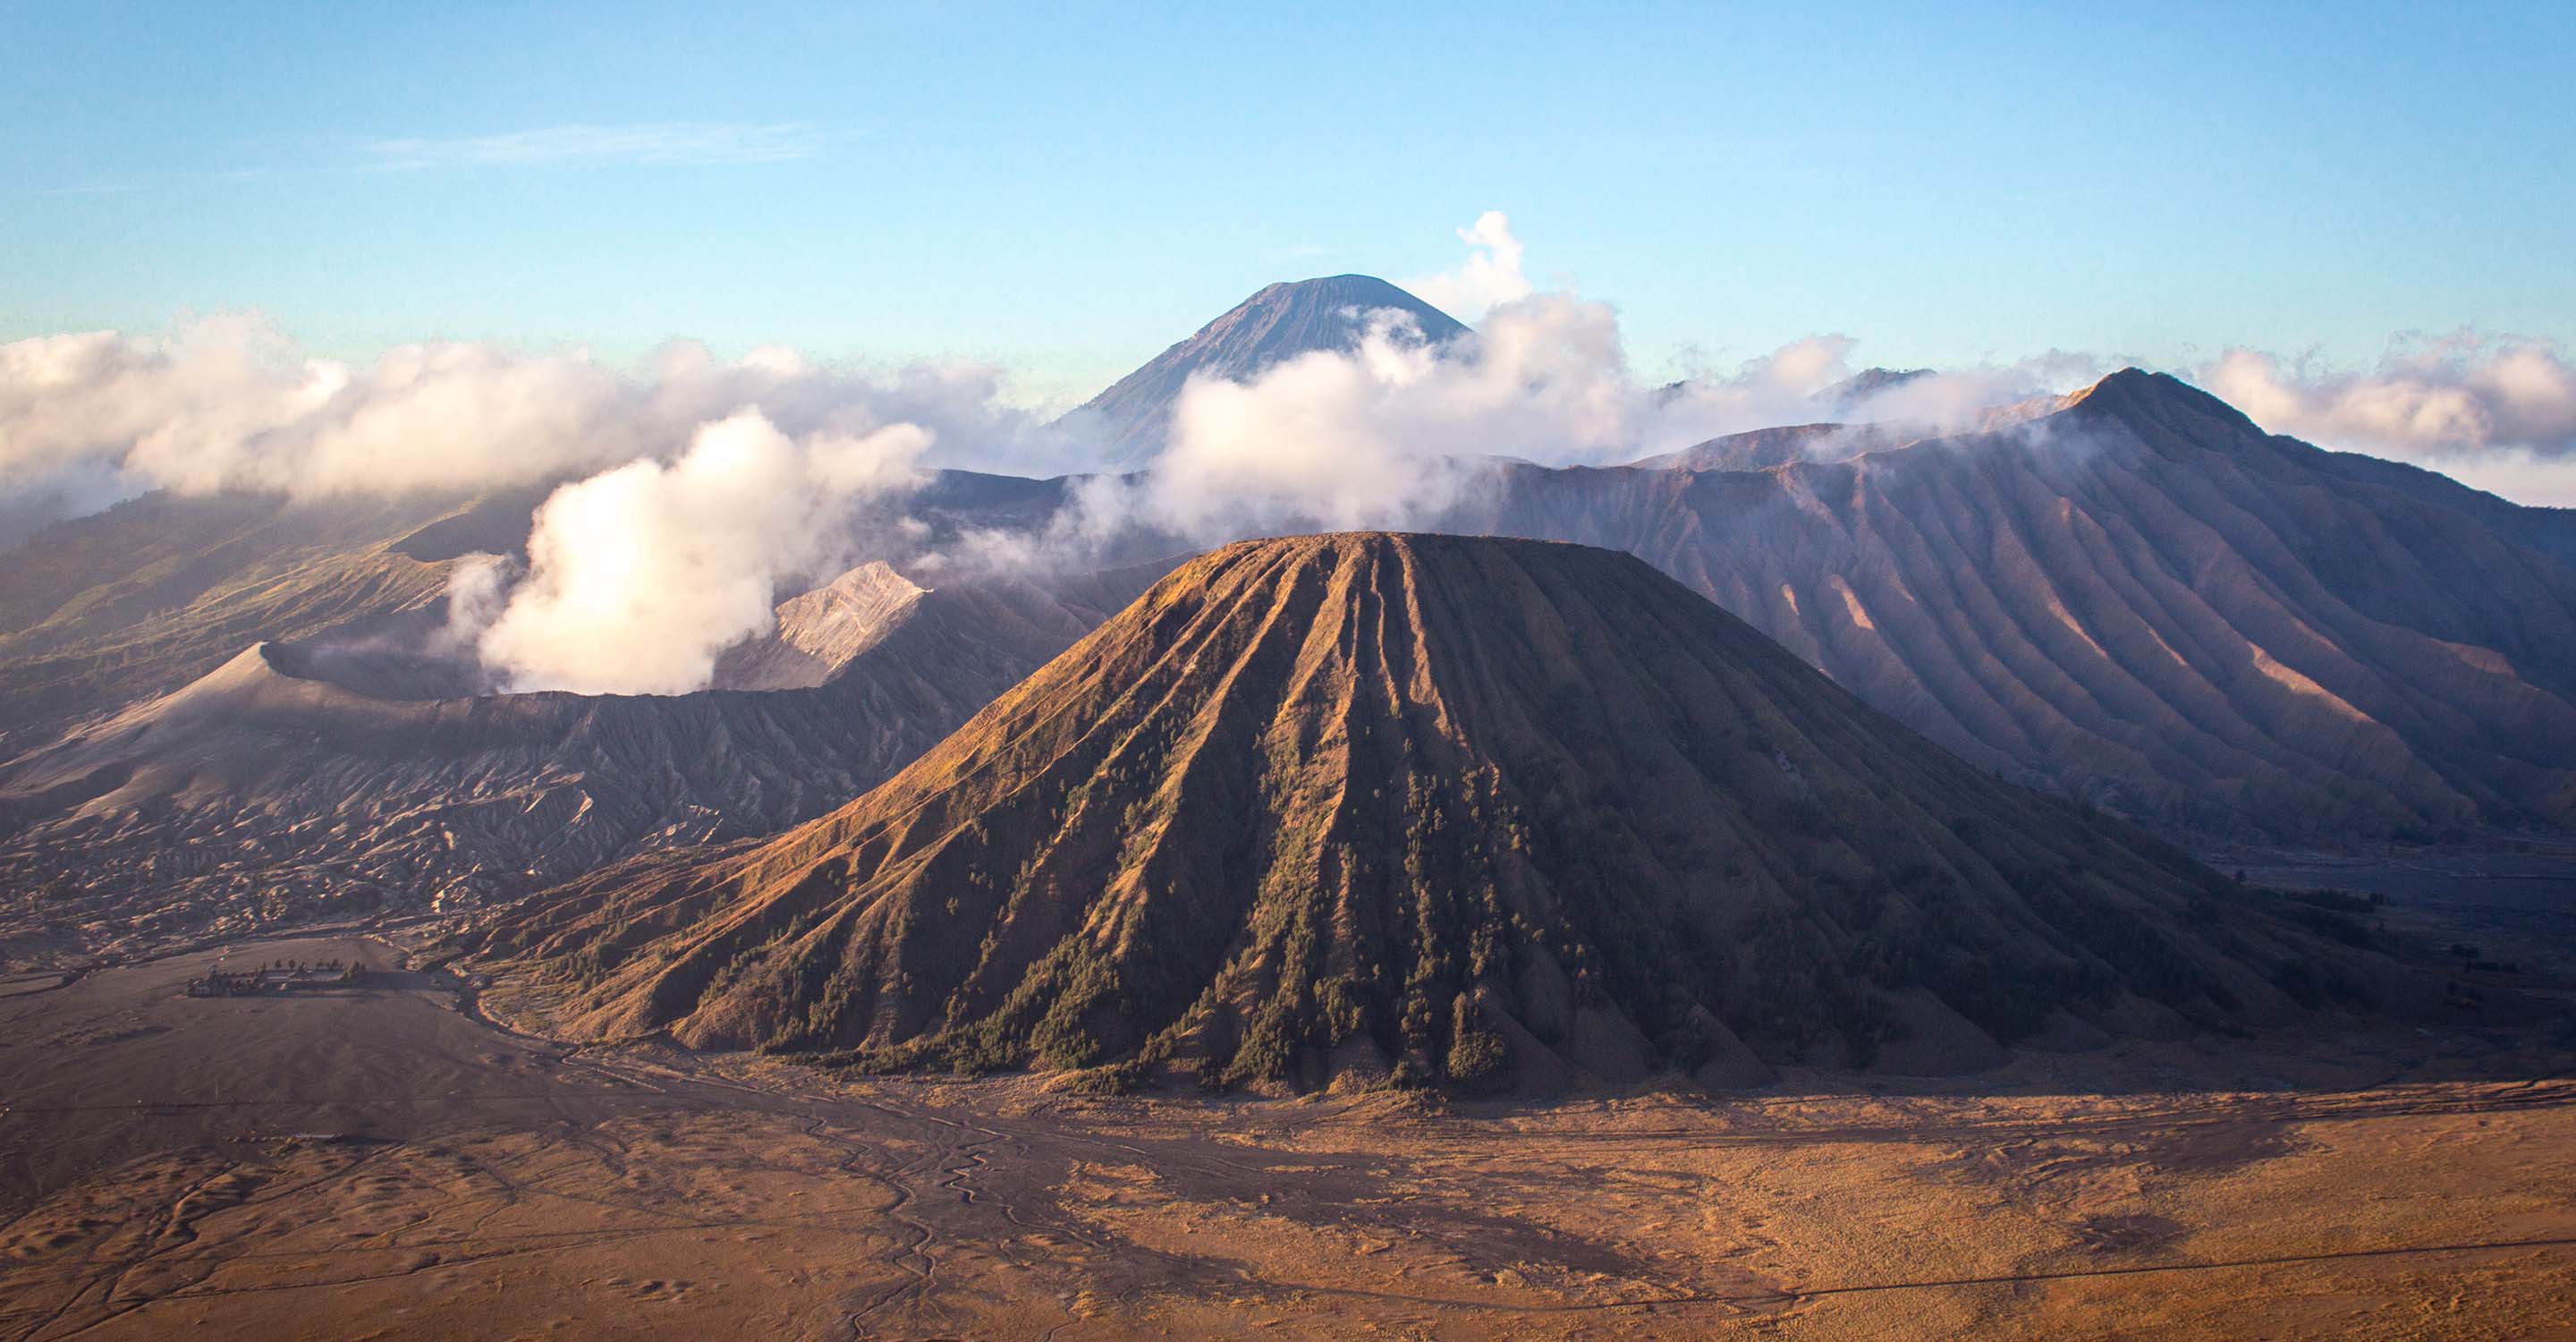 Visiting Mount Bromo, Indonesia: Sunrise over the volcano